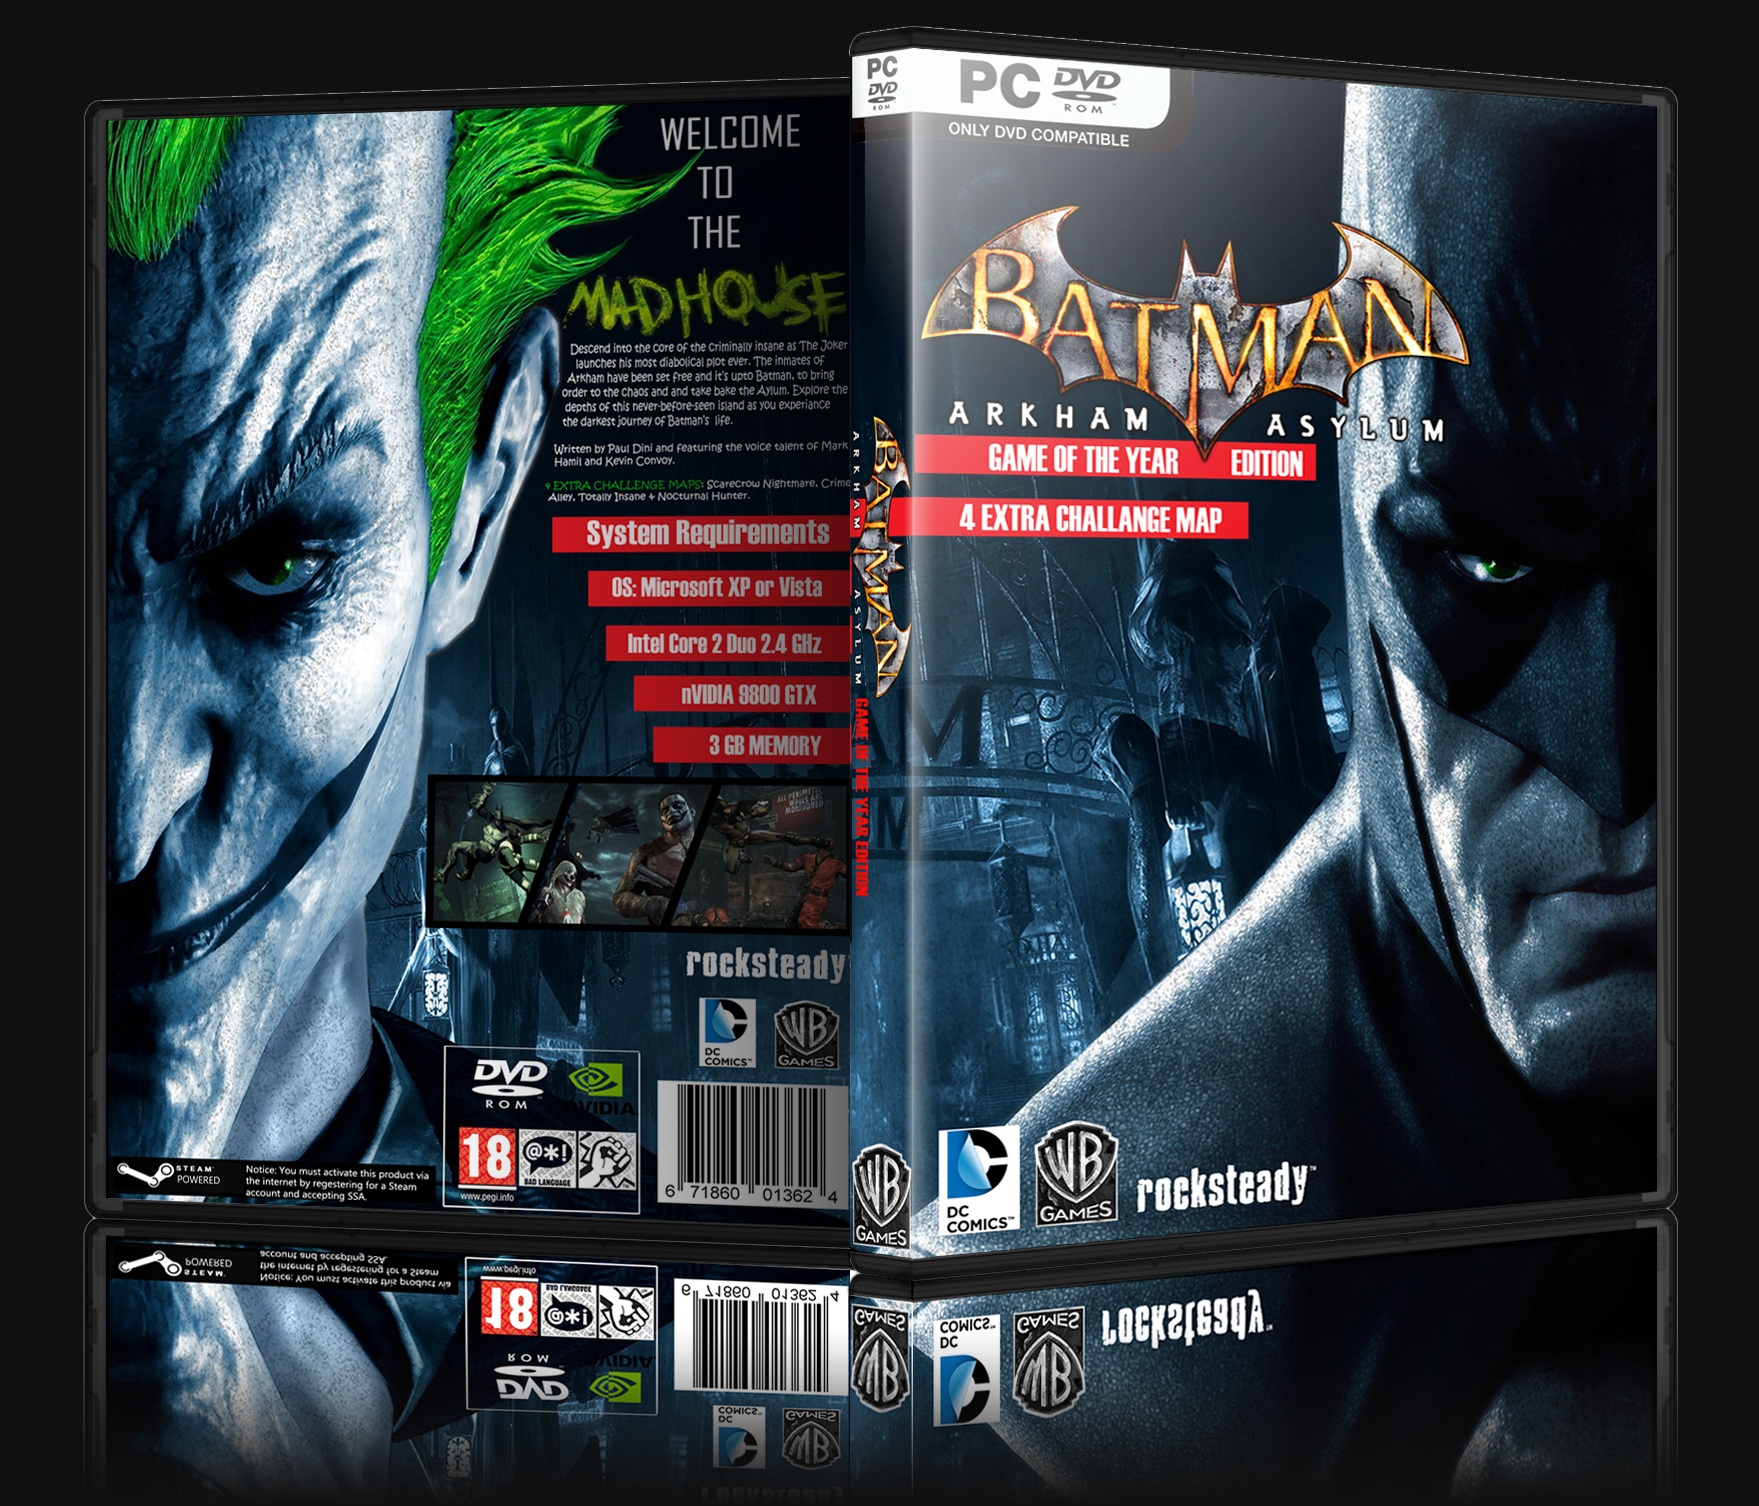 viewing-full-size-batman-arkham-asylum-game-of-the-year-edition-box-cover